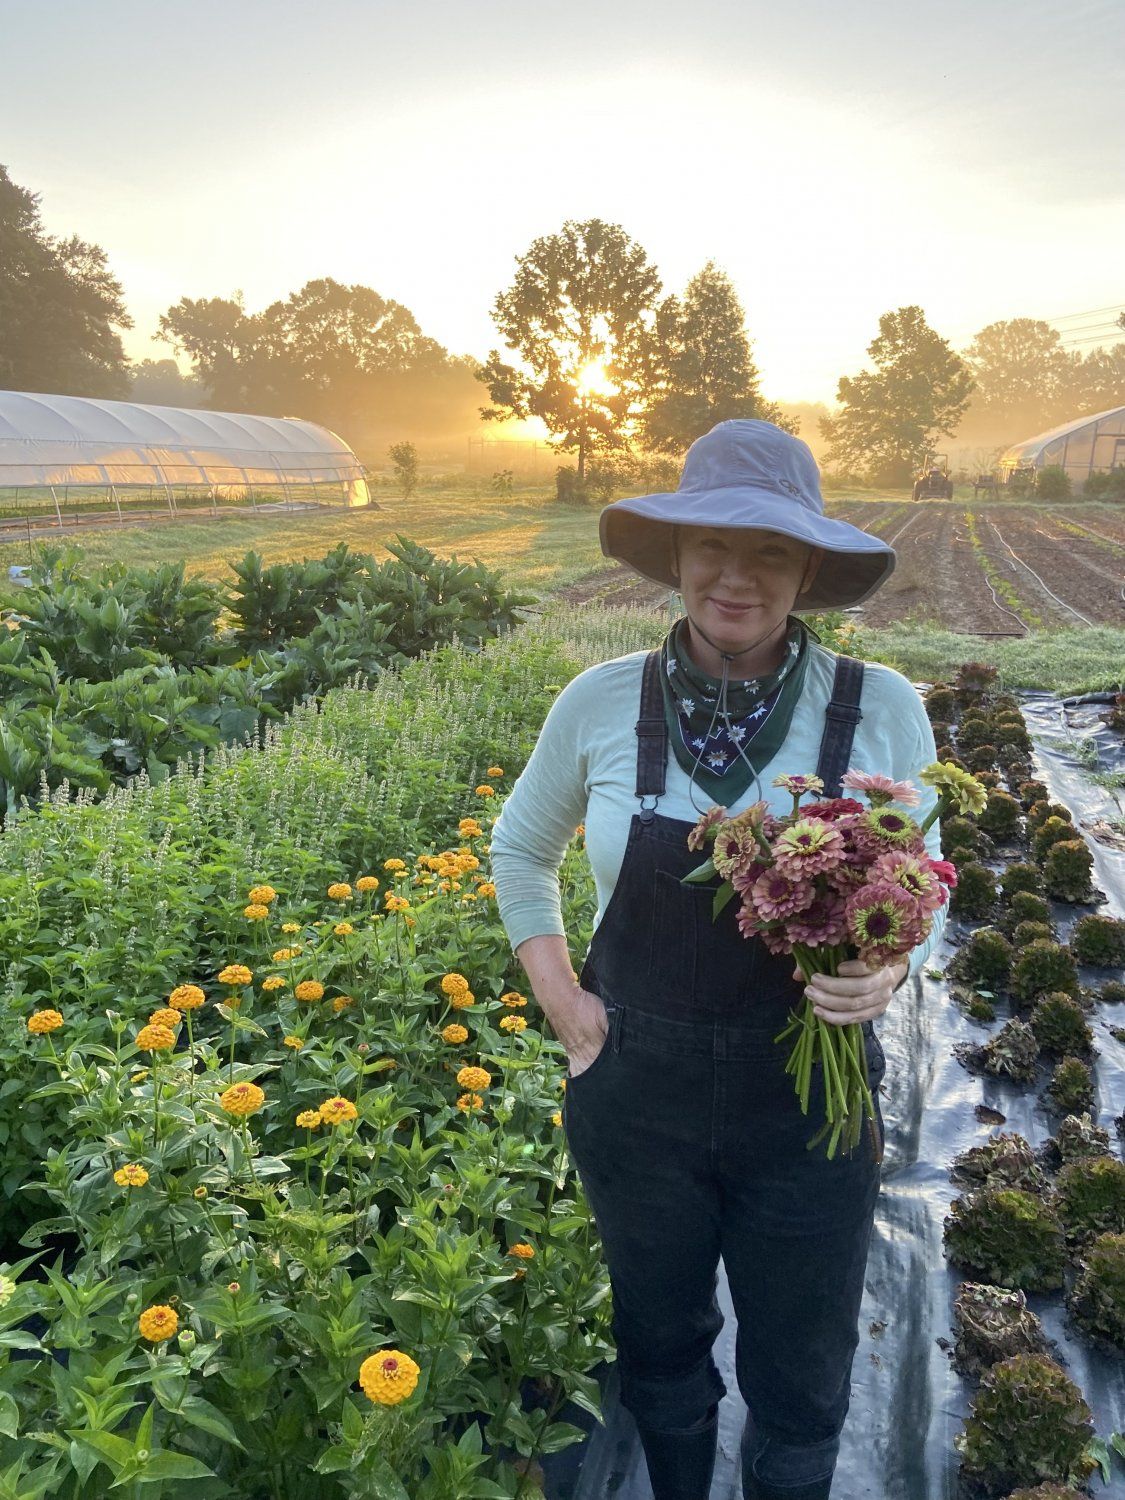 Next Happening: Farm Happenings for July 2, 2021